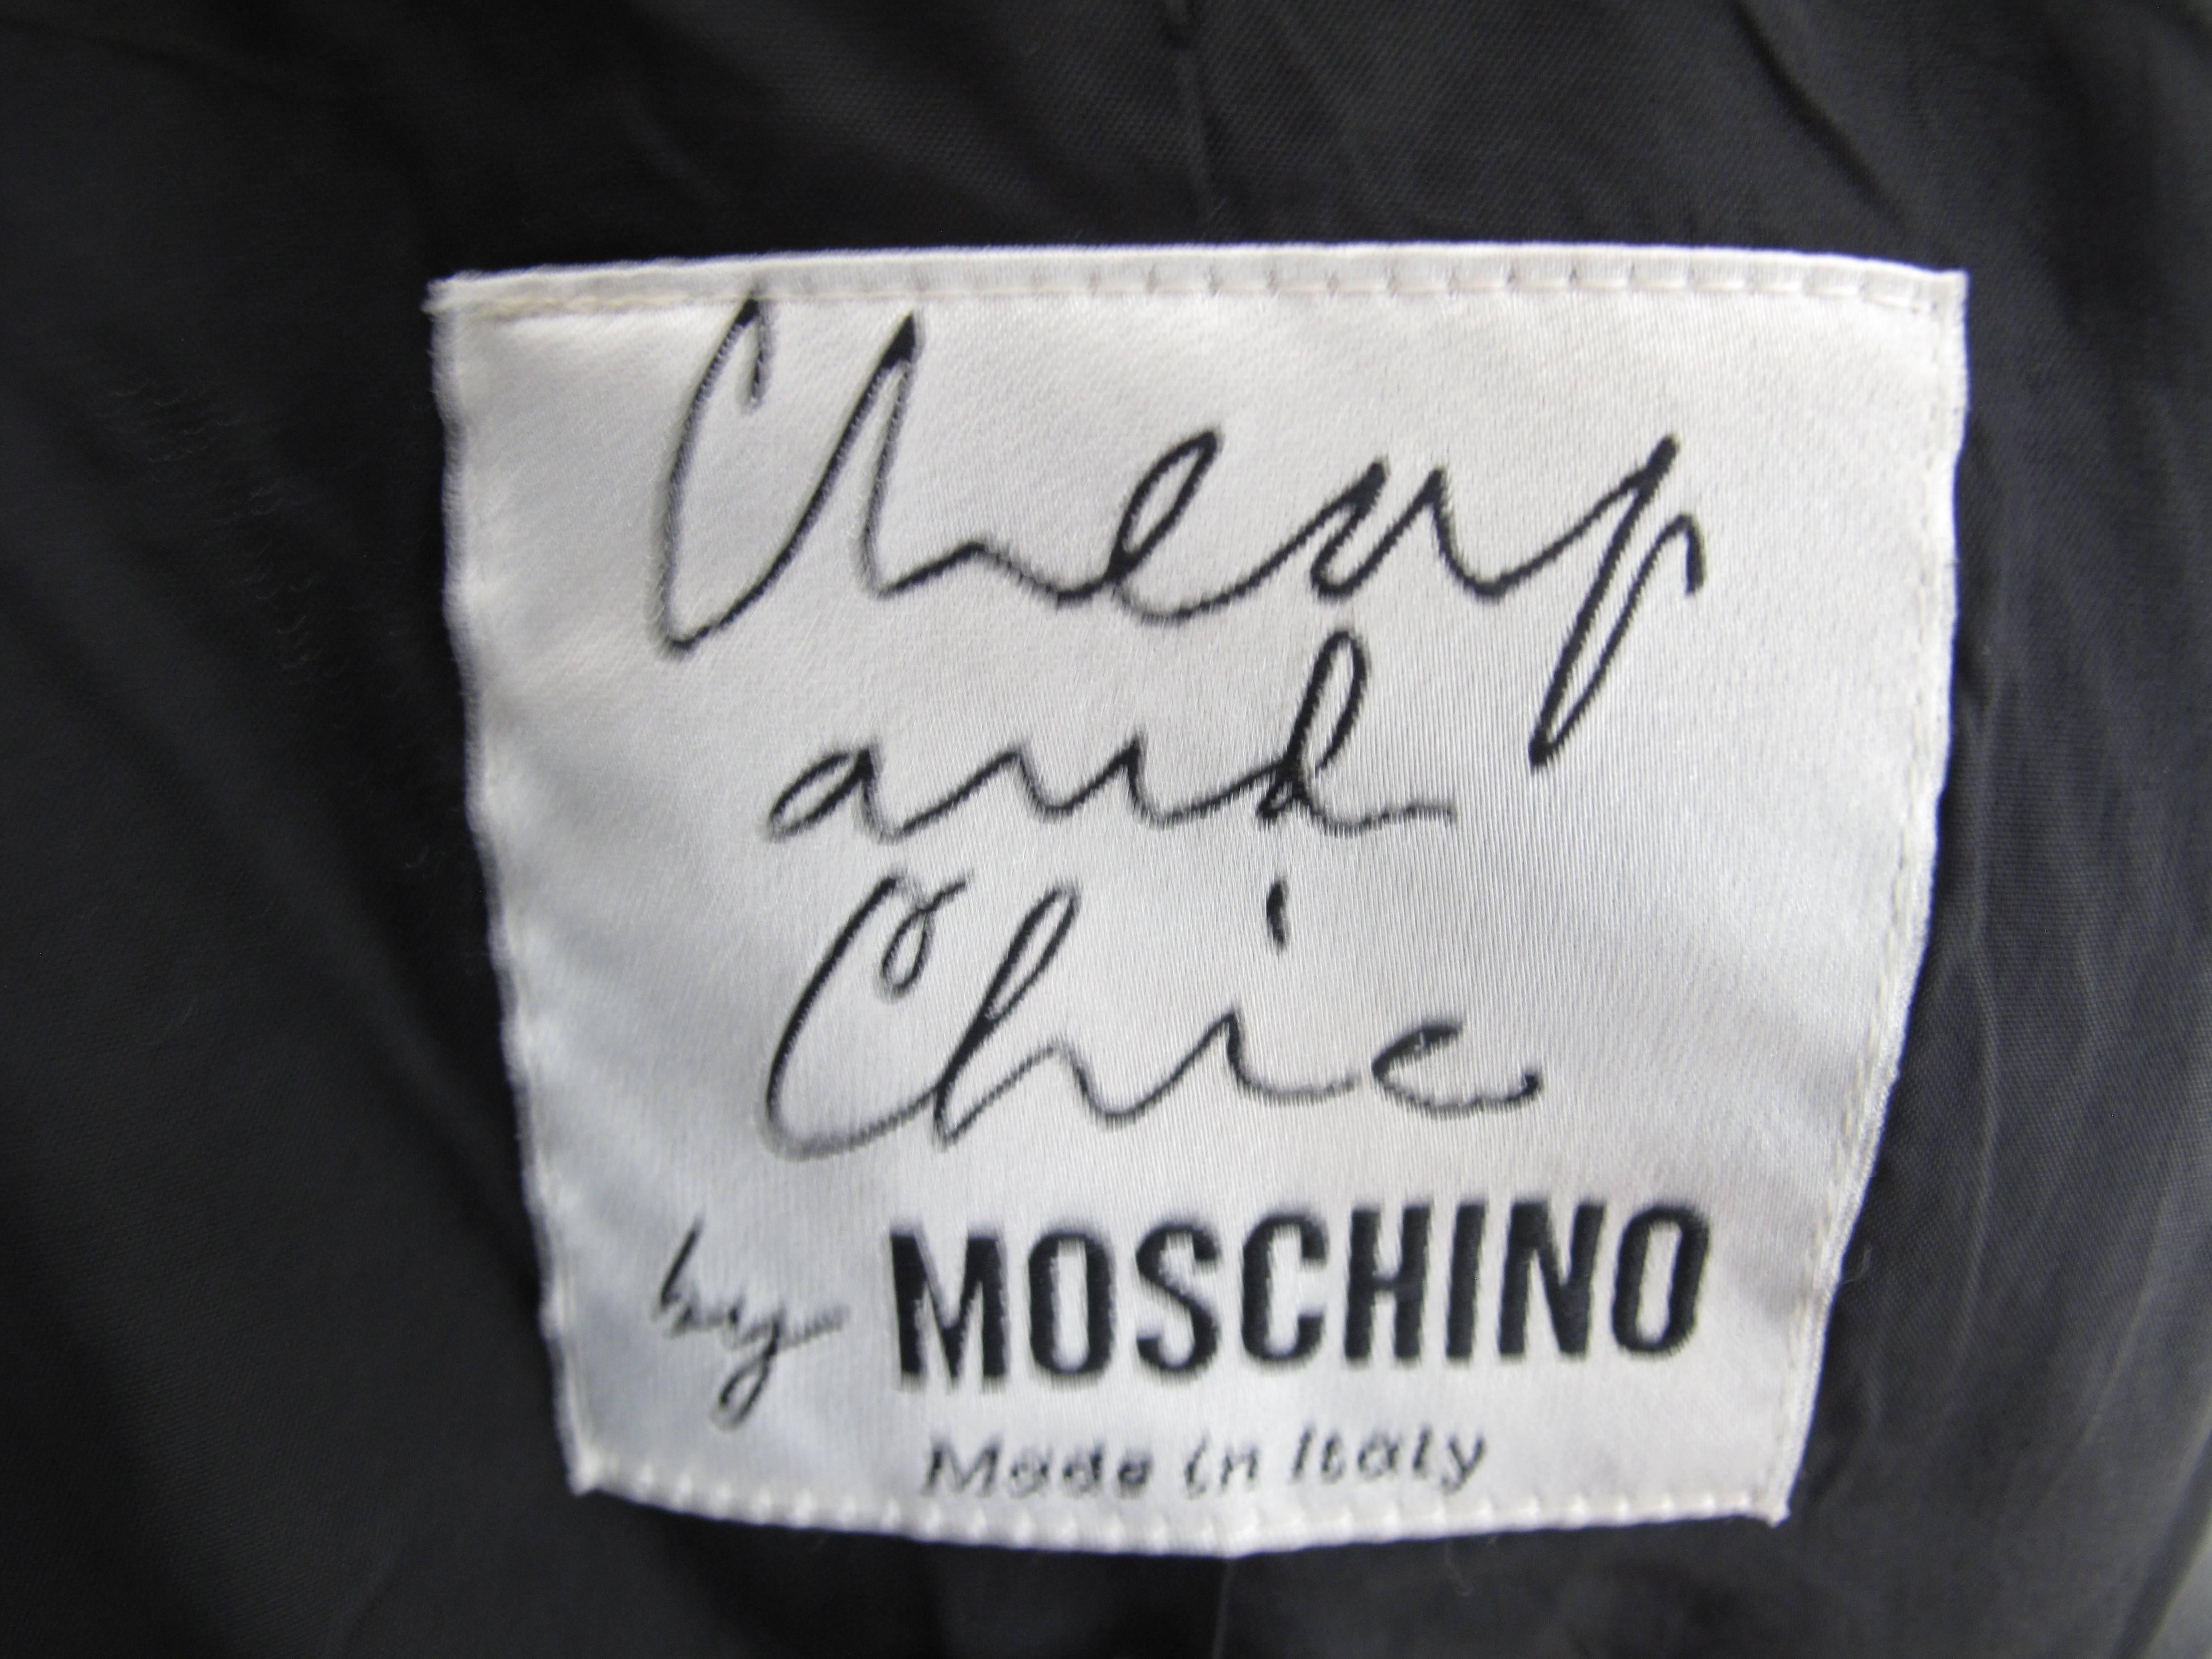 Moschino linen black motorcycle jacket with gold zippers and grosgrain ribbons.  Condition: Excellent. Size Small

We accept returns for refund, please see our terms.  We offer free ground shipping within the US